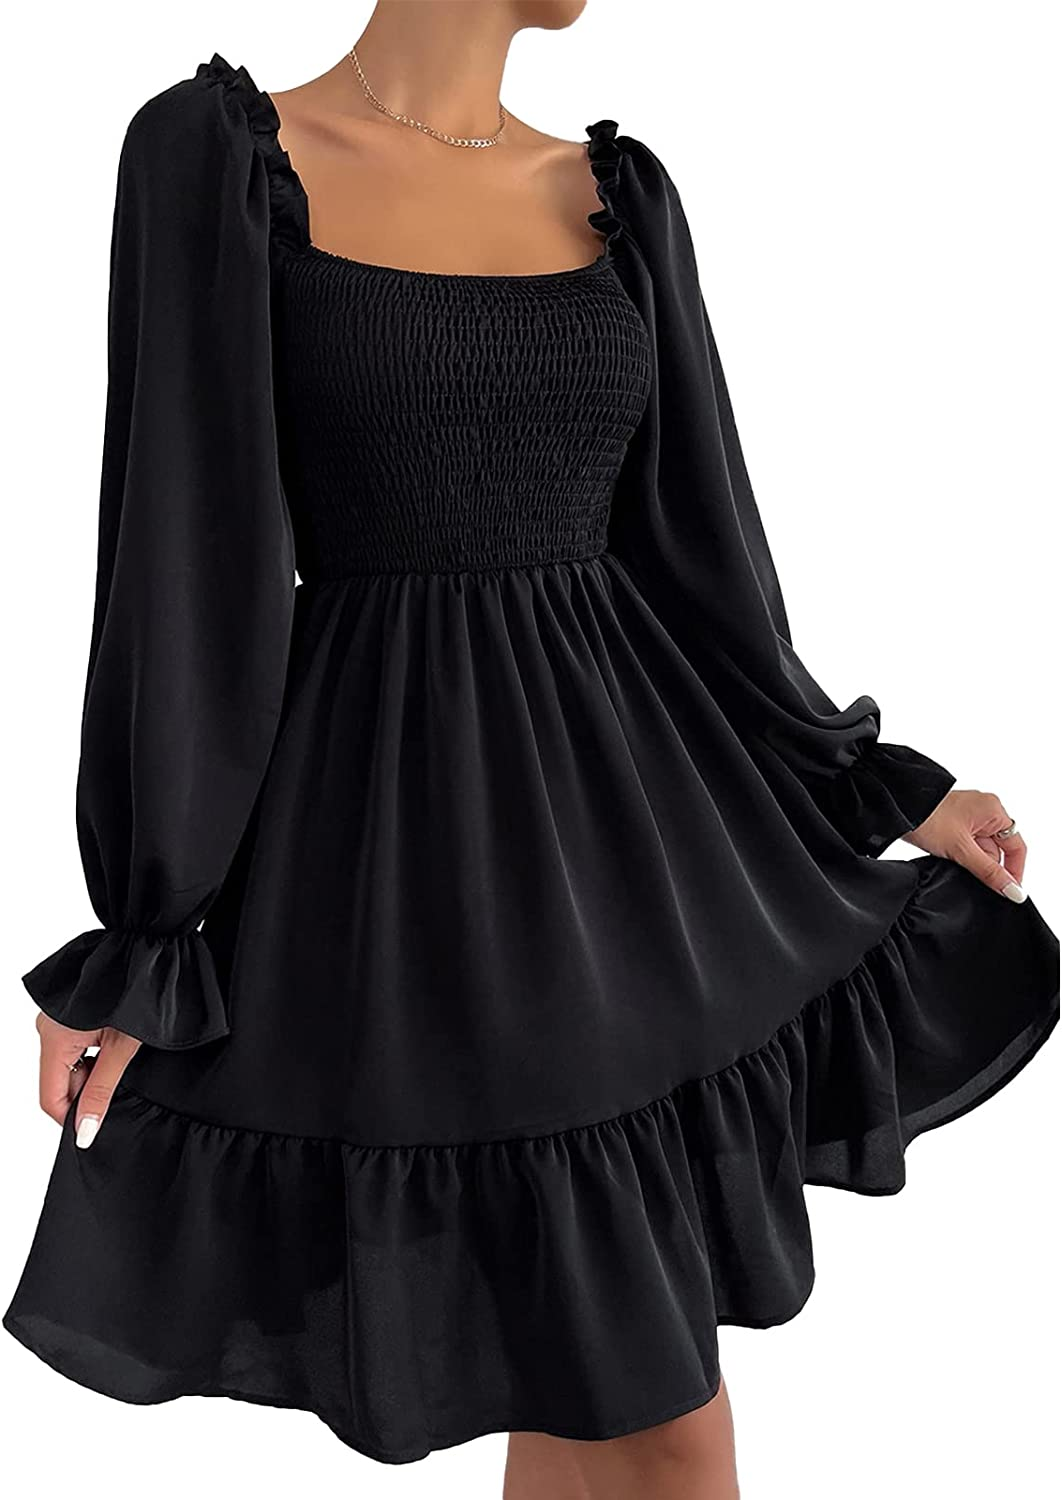 Dresses With Sleeves